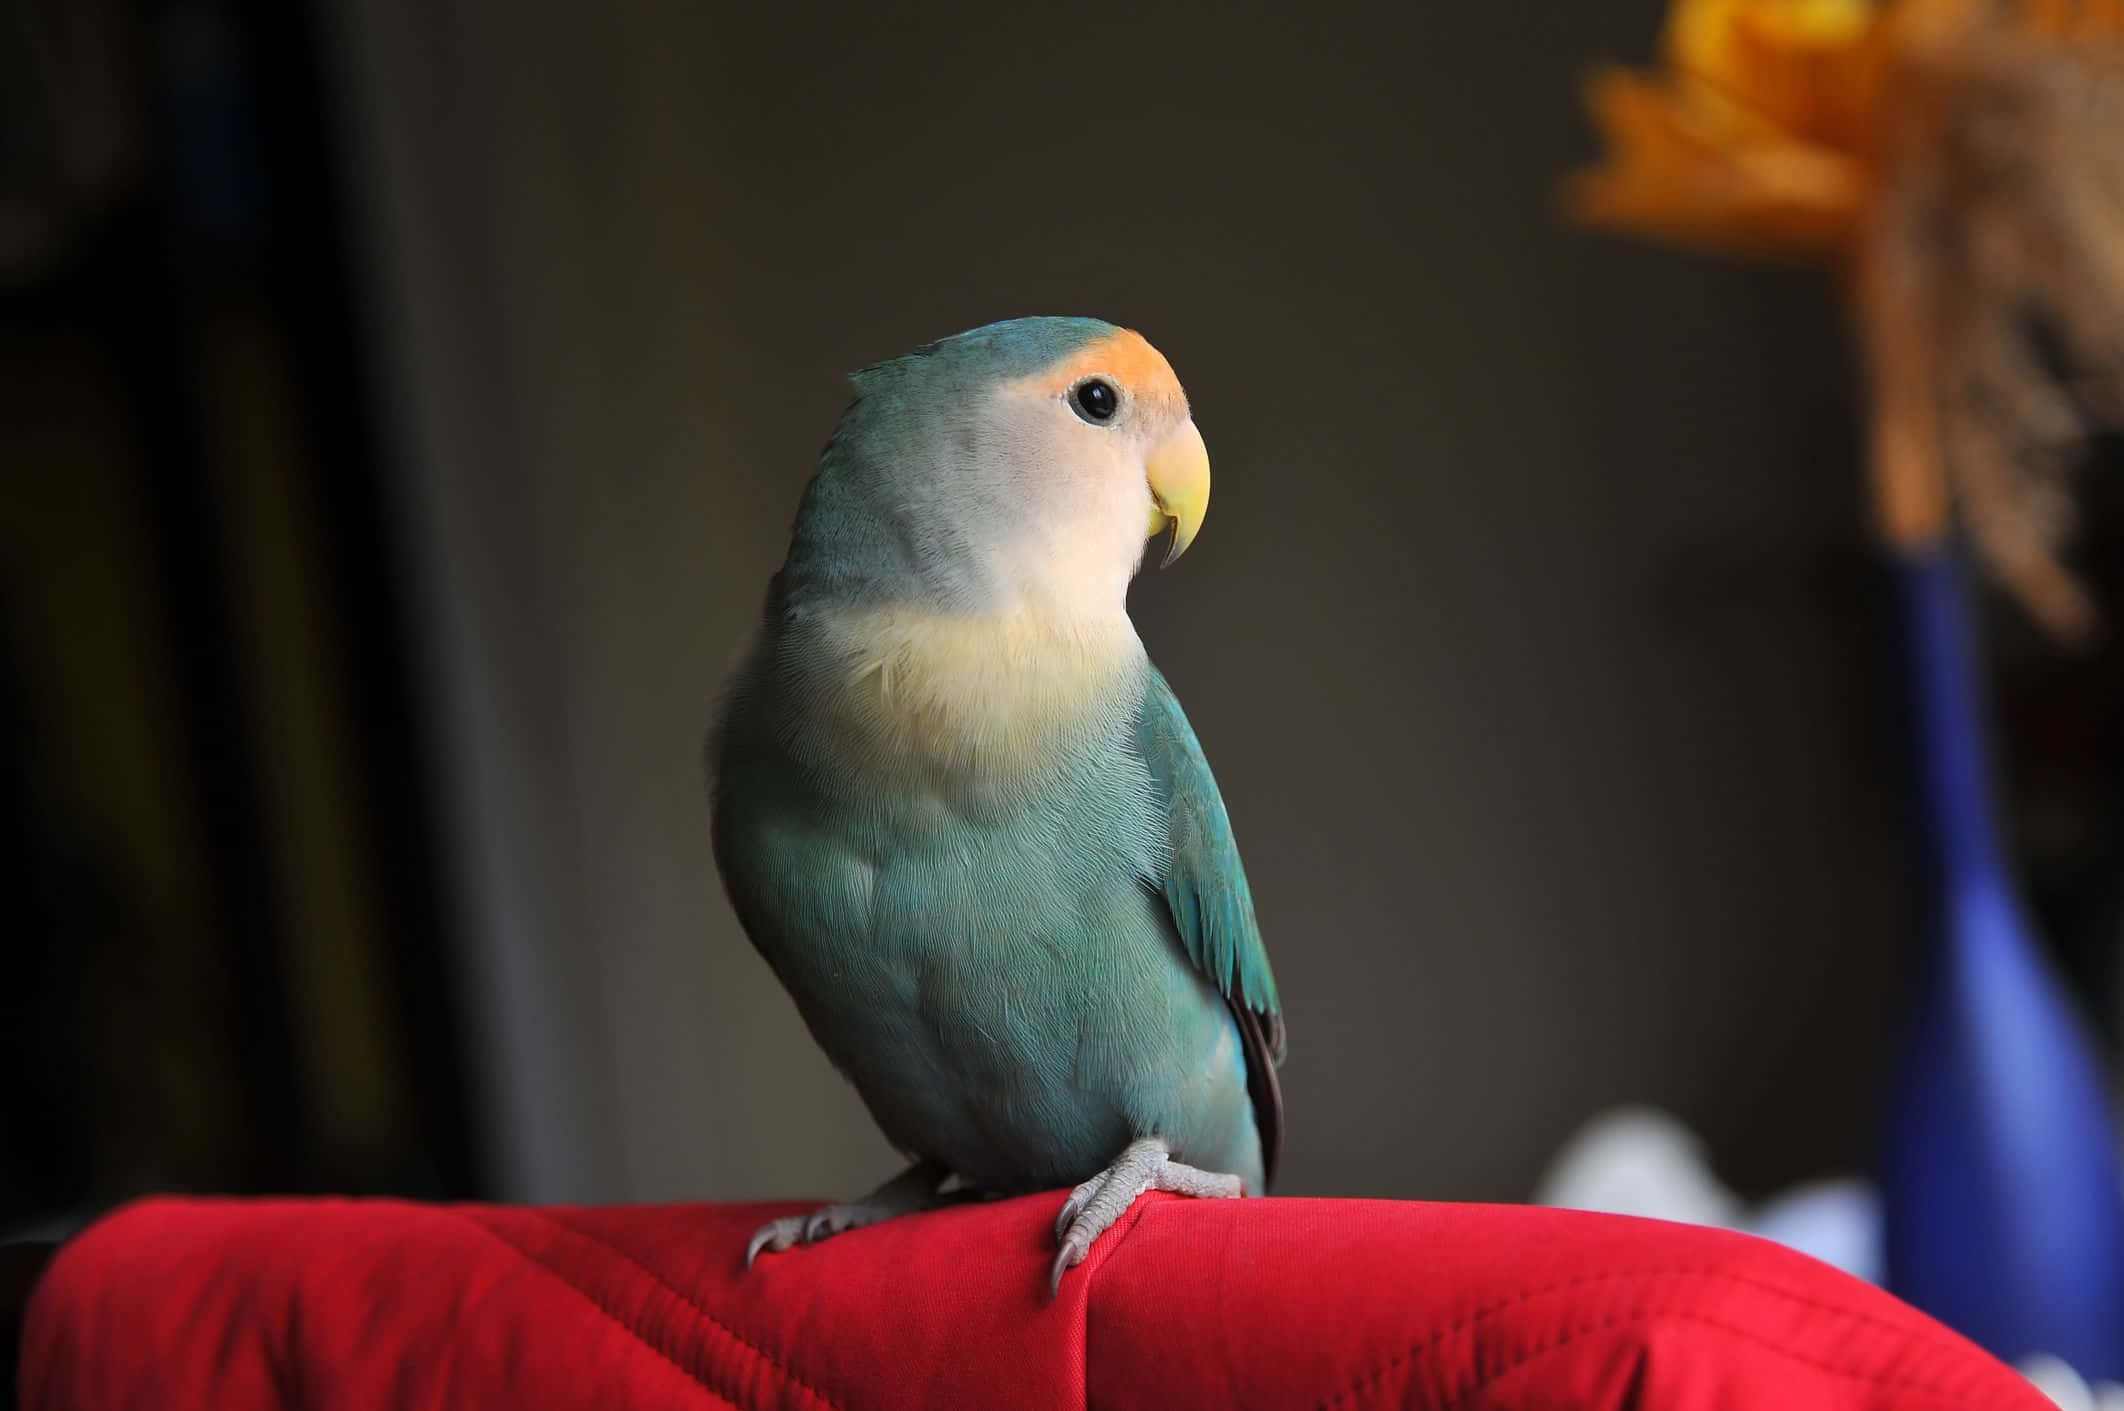 A Blue And Yellow Parrot Sitting On A Red Blanket